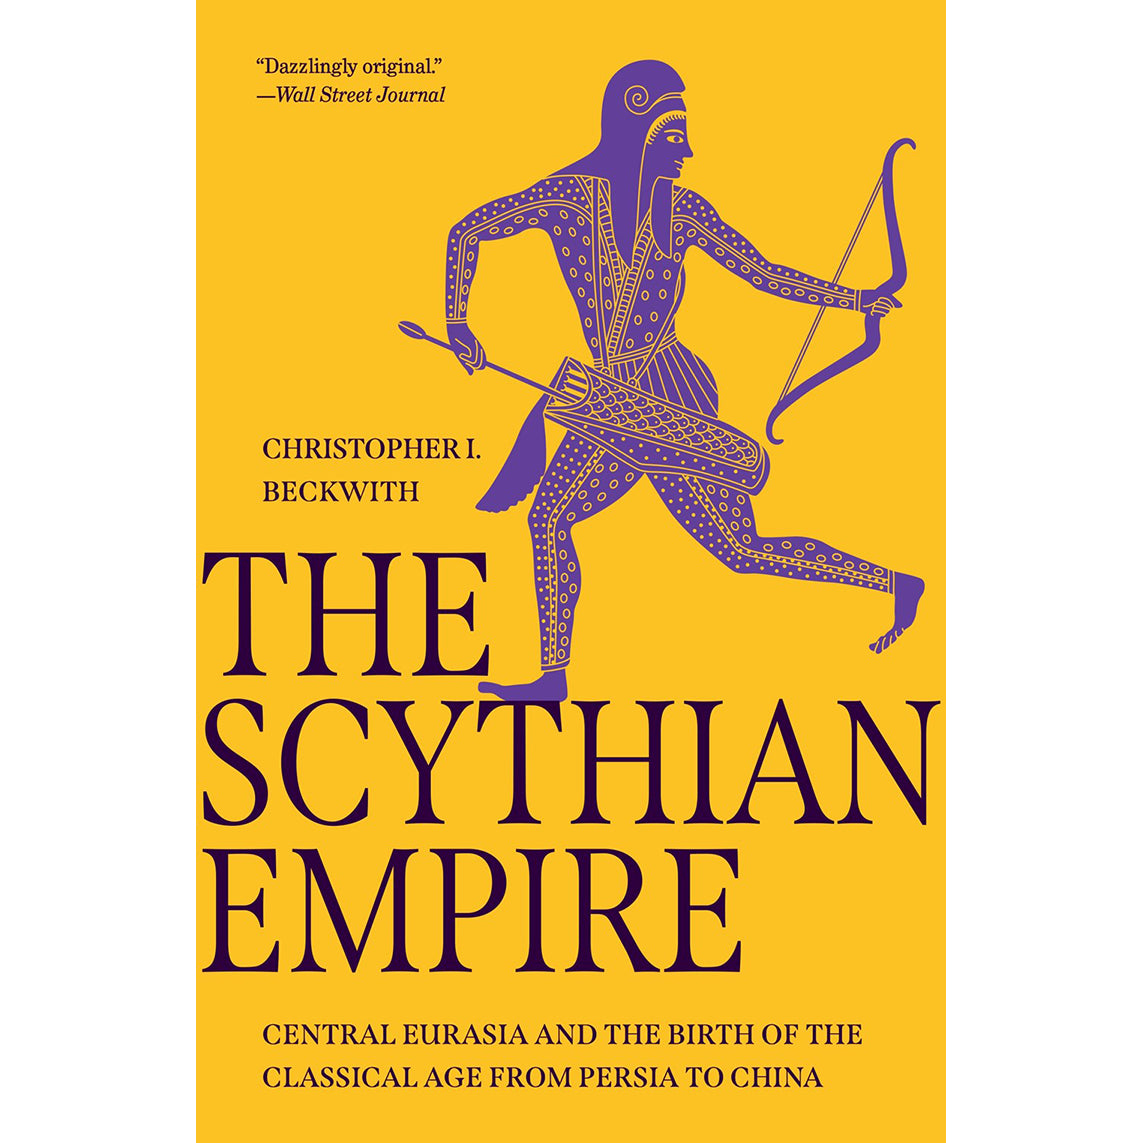 The Scythian Empire: Central Eurasia and the Birth of the Classical Age from Persia to China